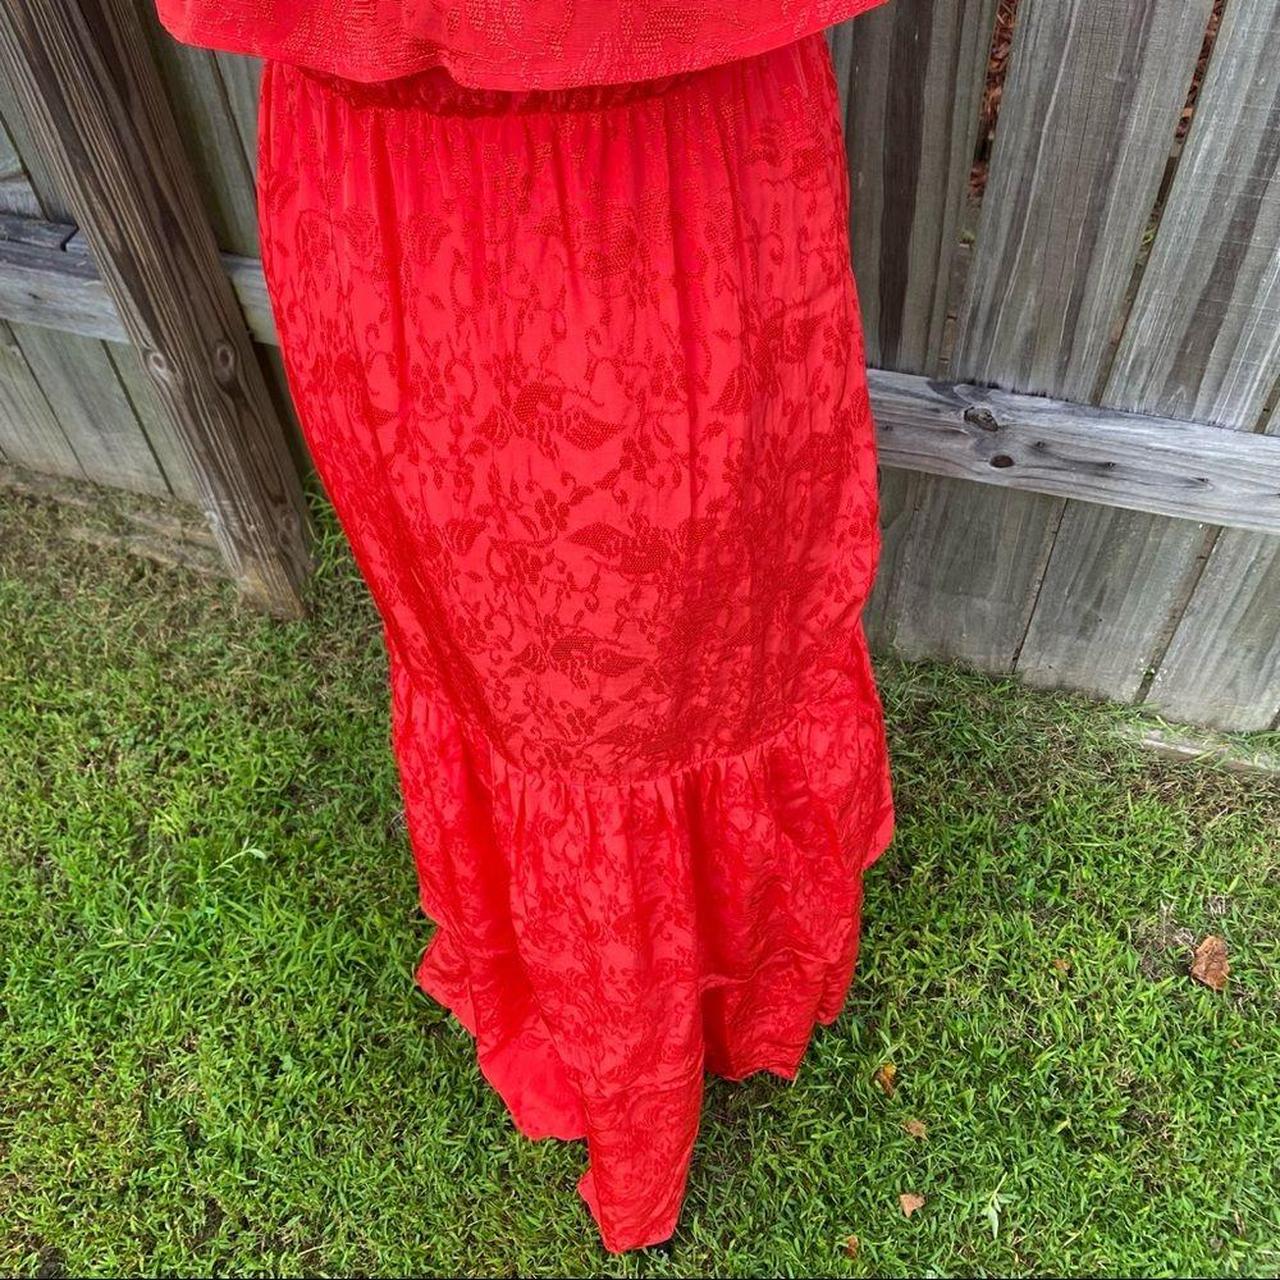 Product Image 4 - Miriana Dress in Bright Red
Gorgeous